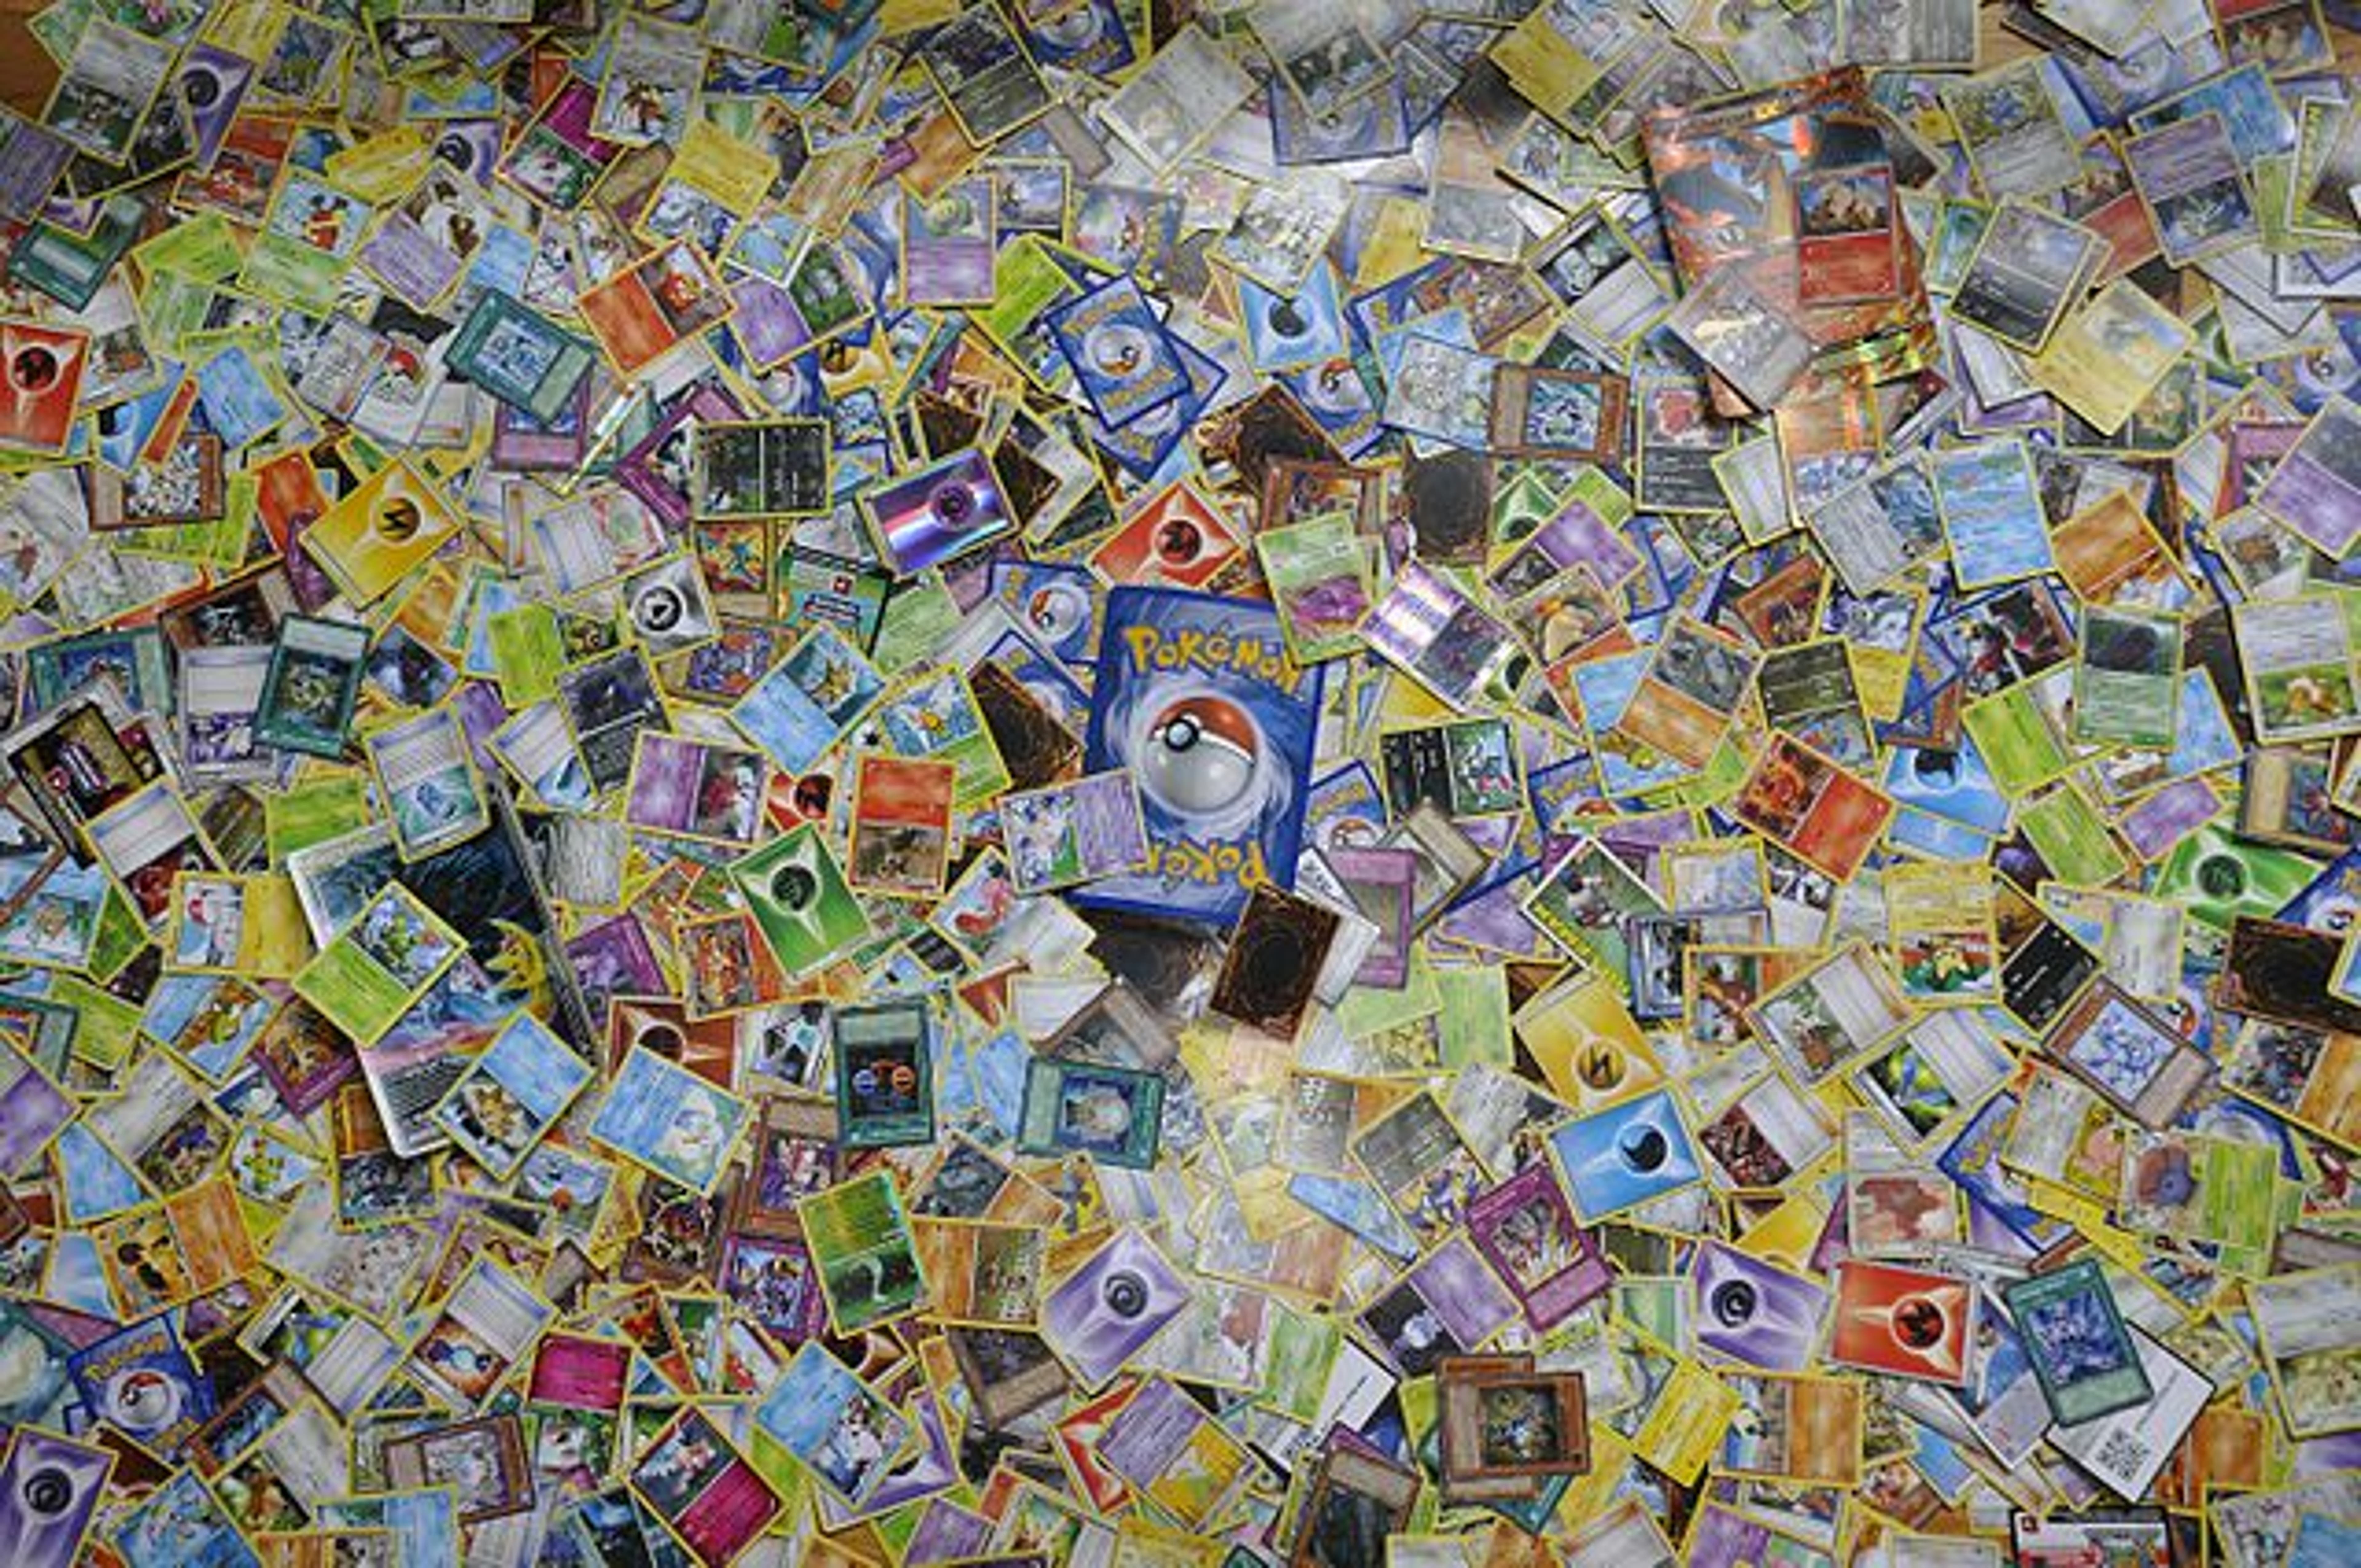 EXCLUSIVE: Trader Chris Camillo Sets Pokémon Card Sales Record With $375K 1st Edition Box Set Purchase